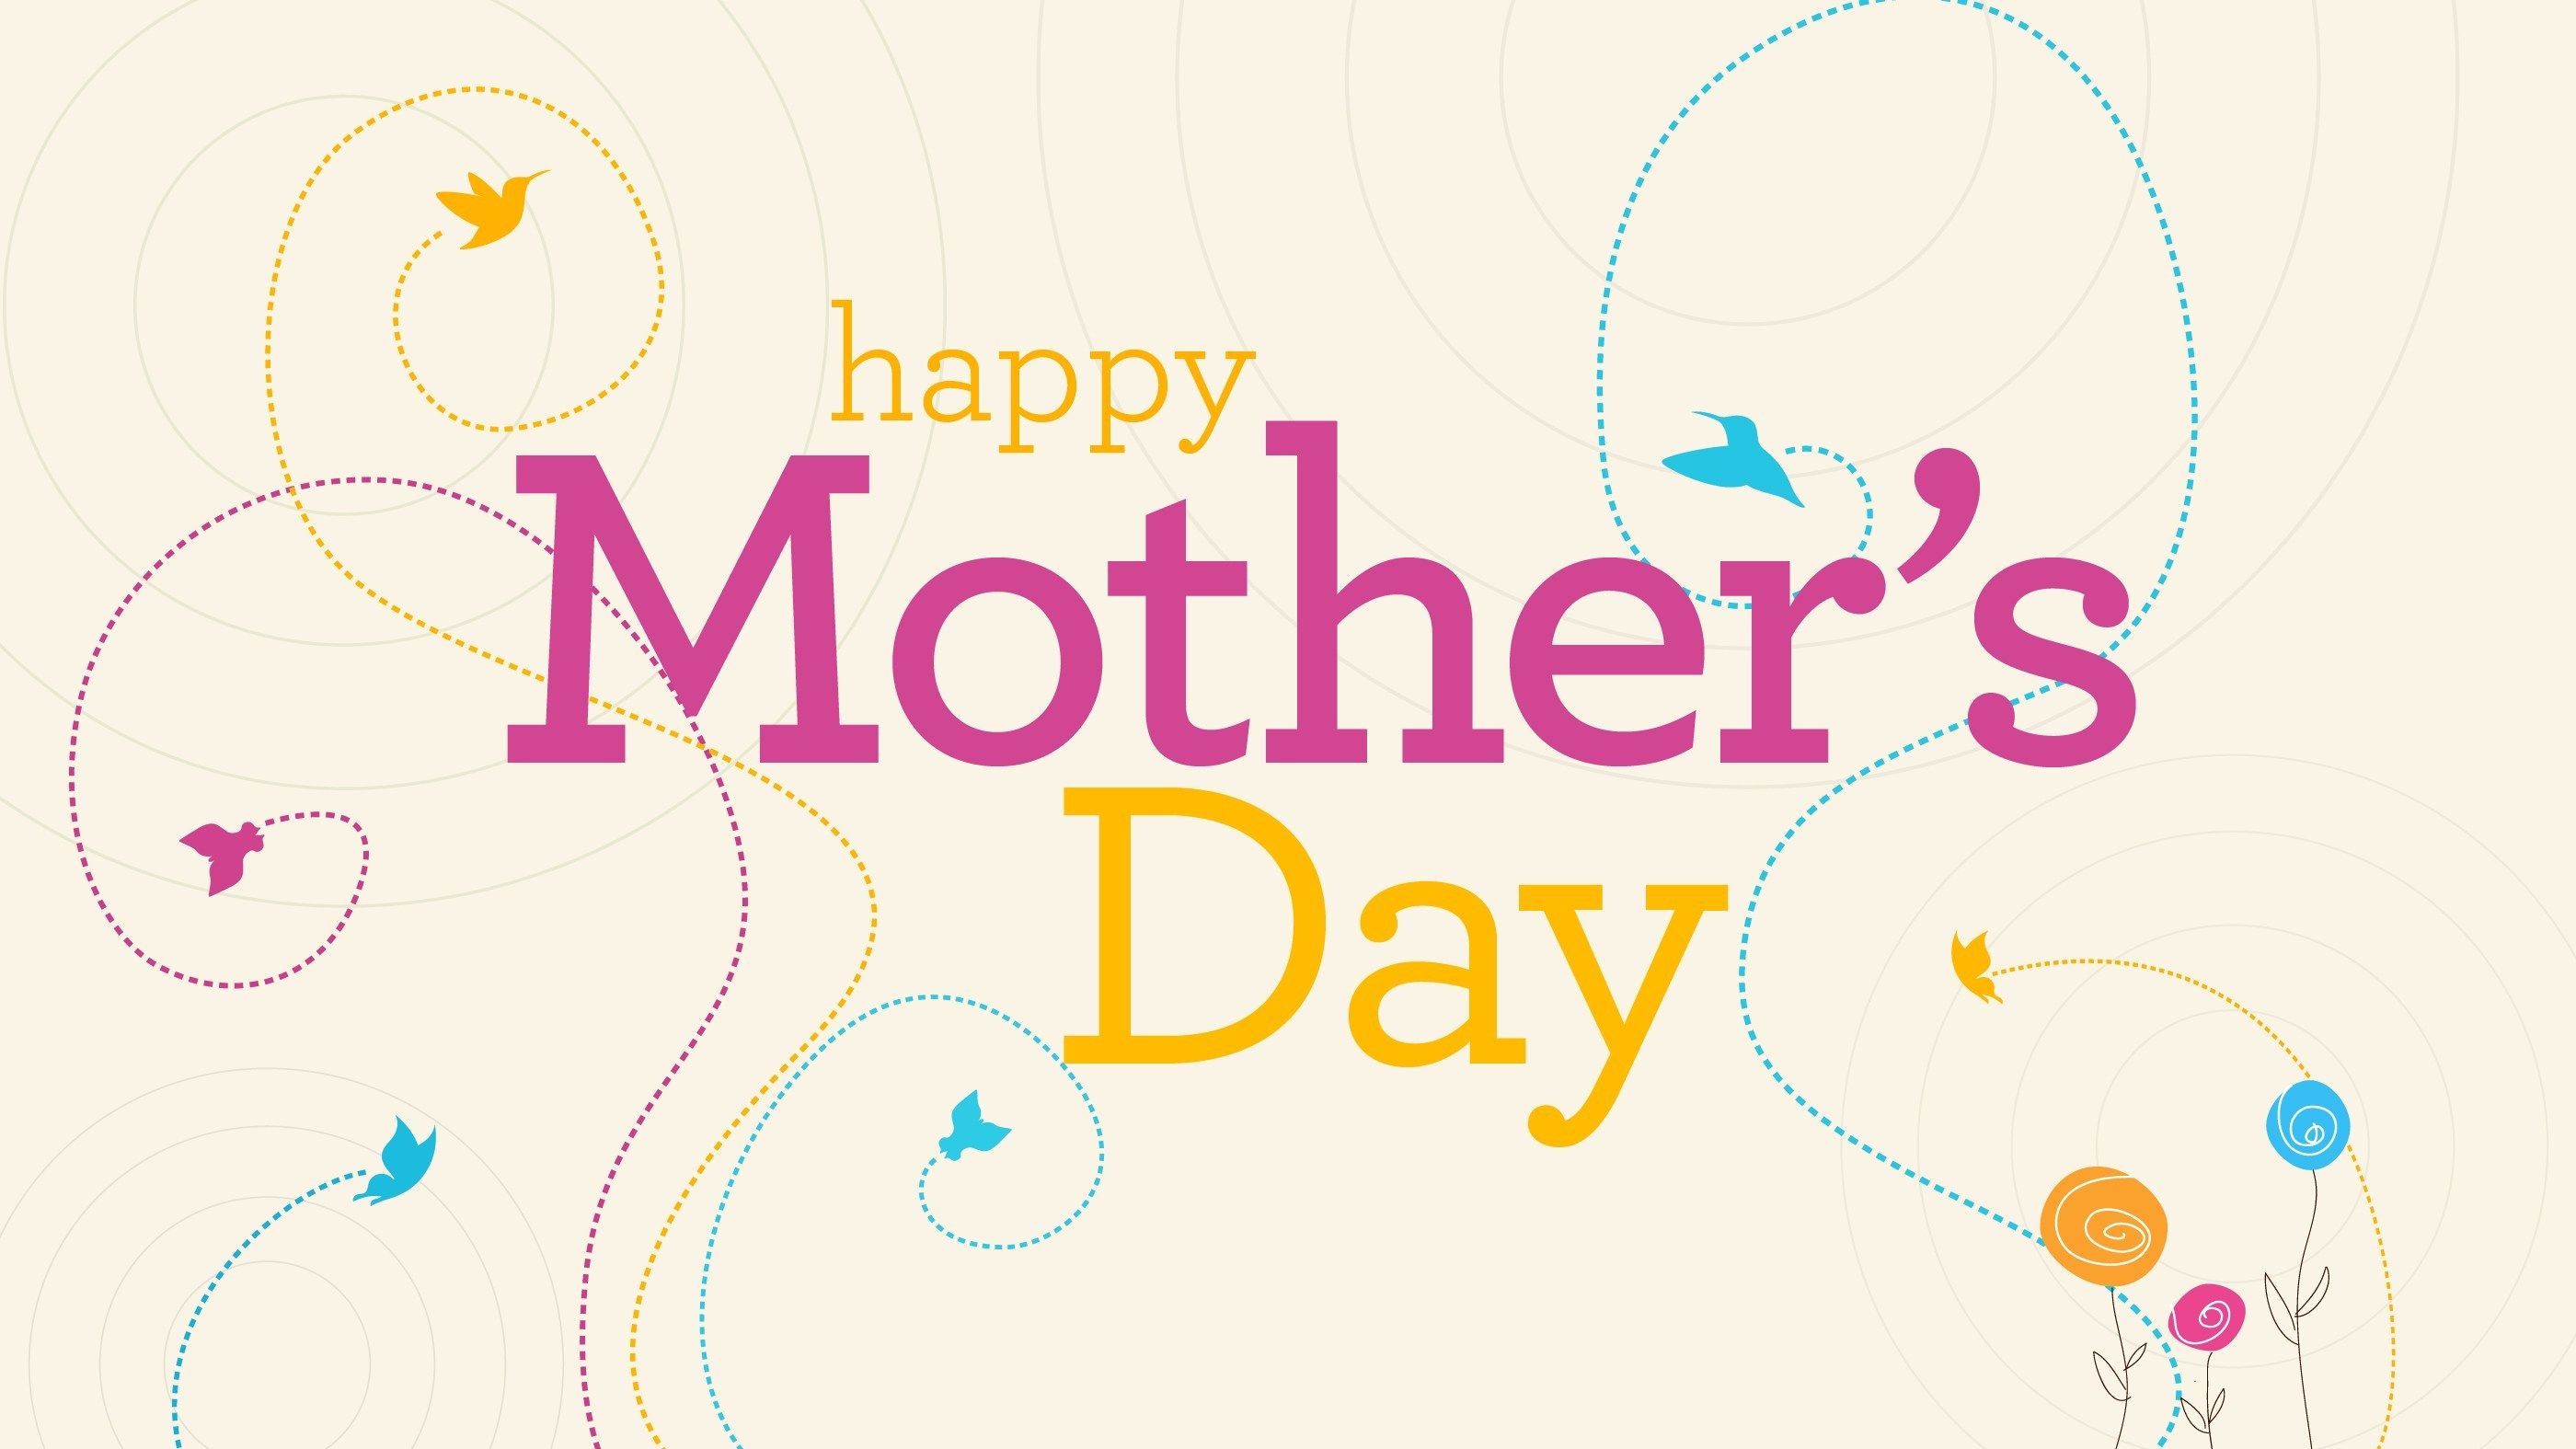 Happy Mother's Day 2019 HD Picture And Ultra HD Wallpaper For Facebook And WhatsApp